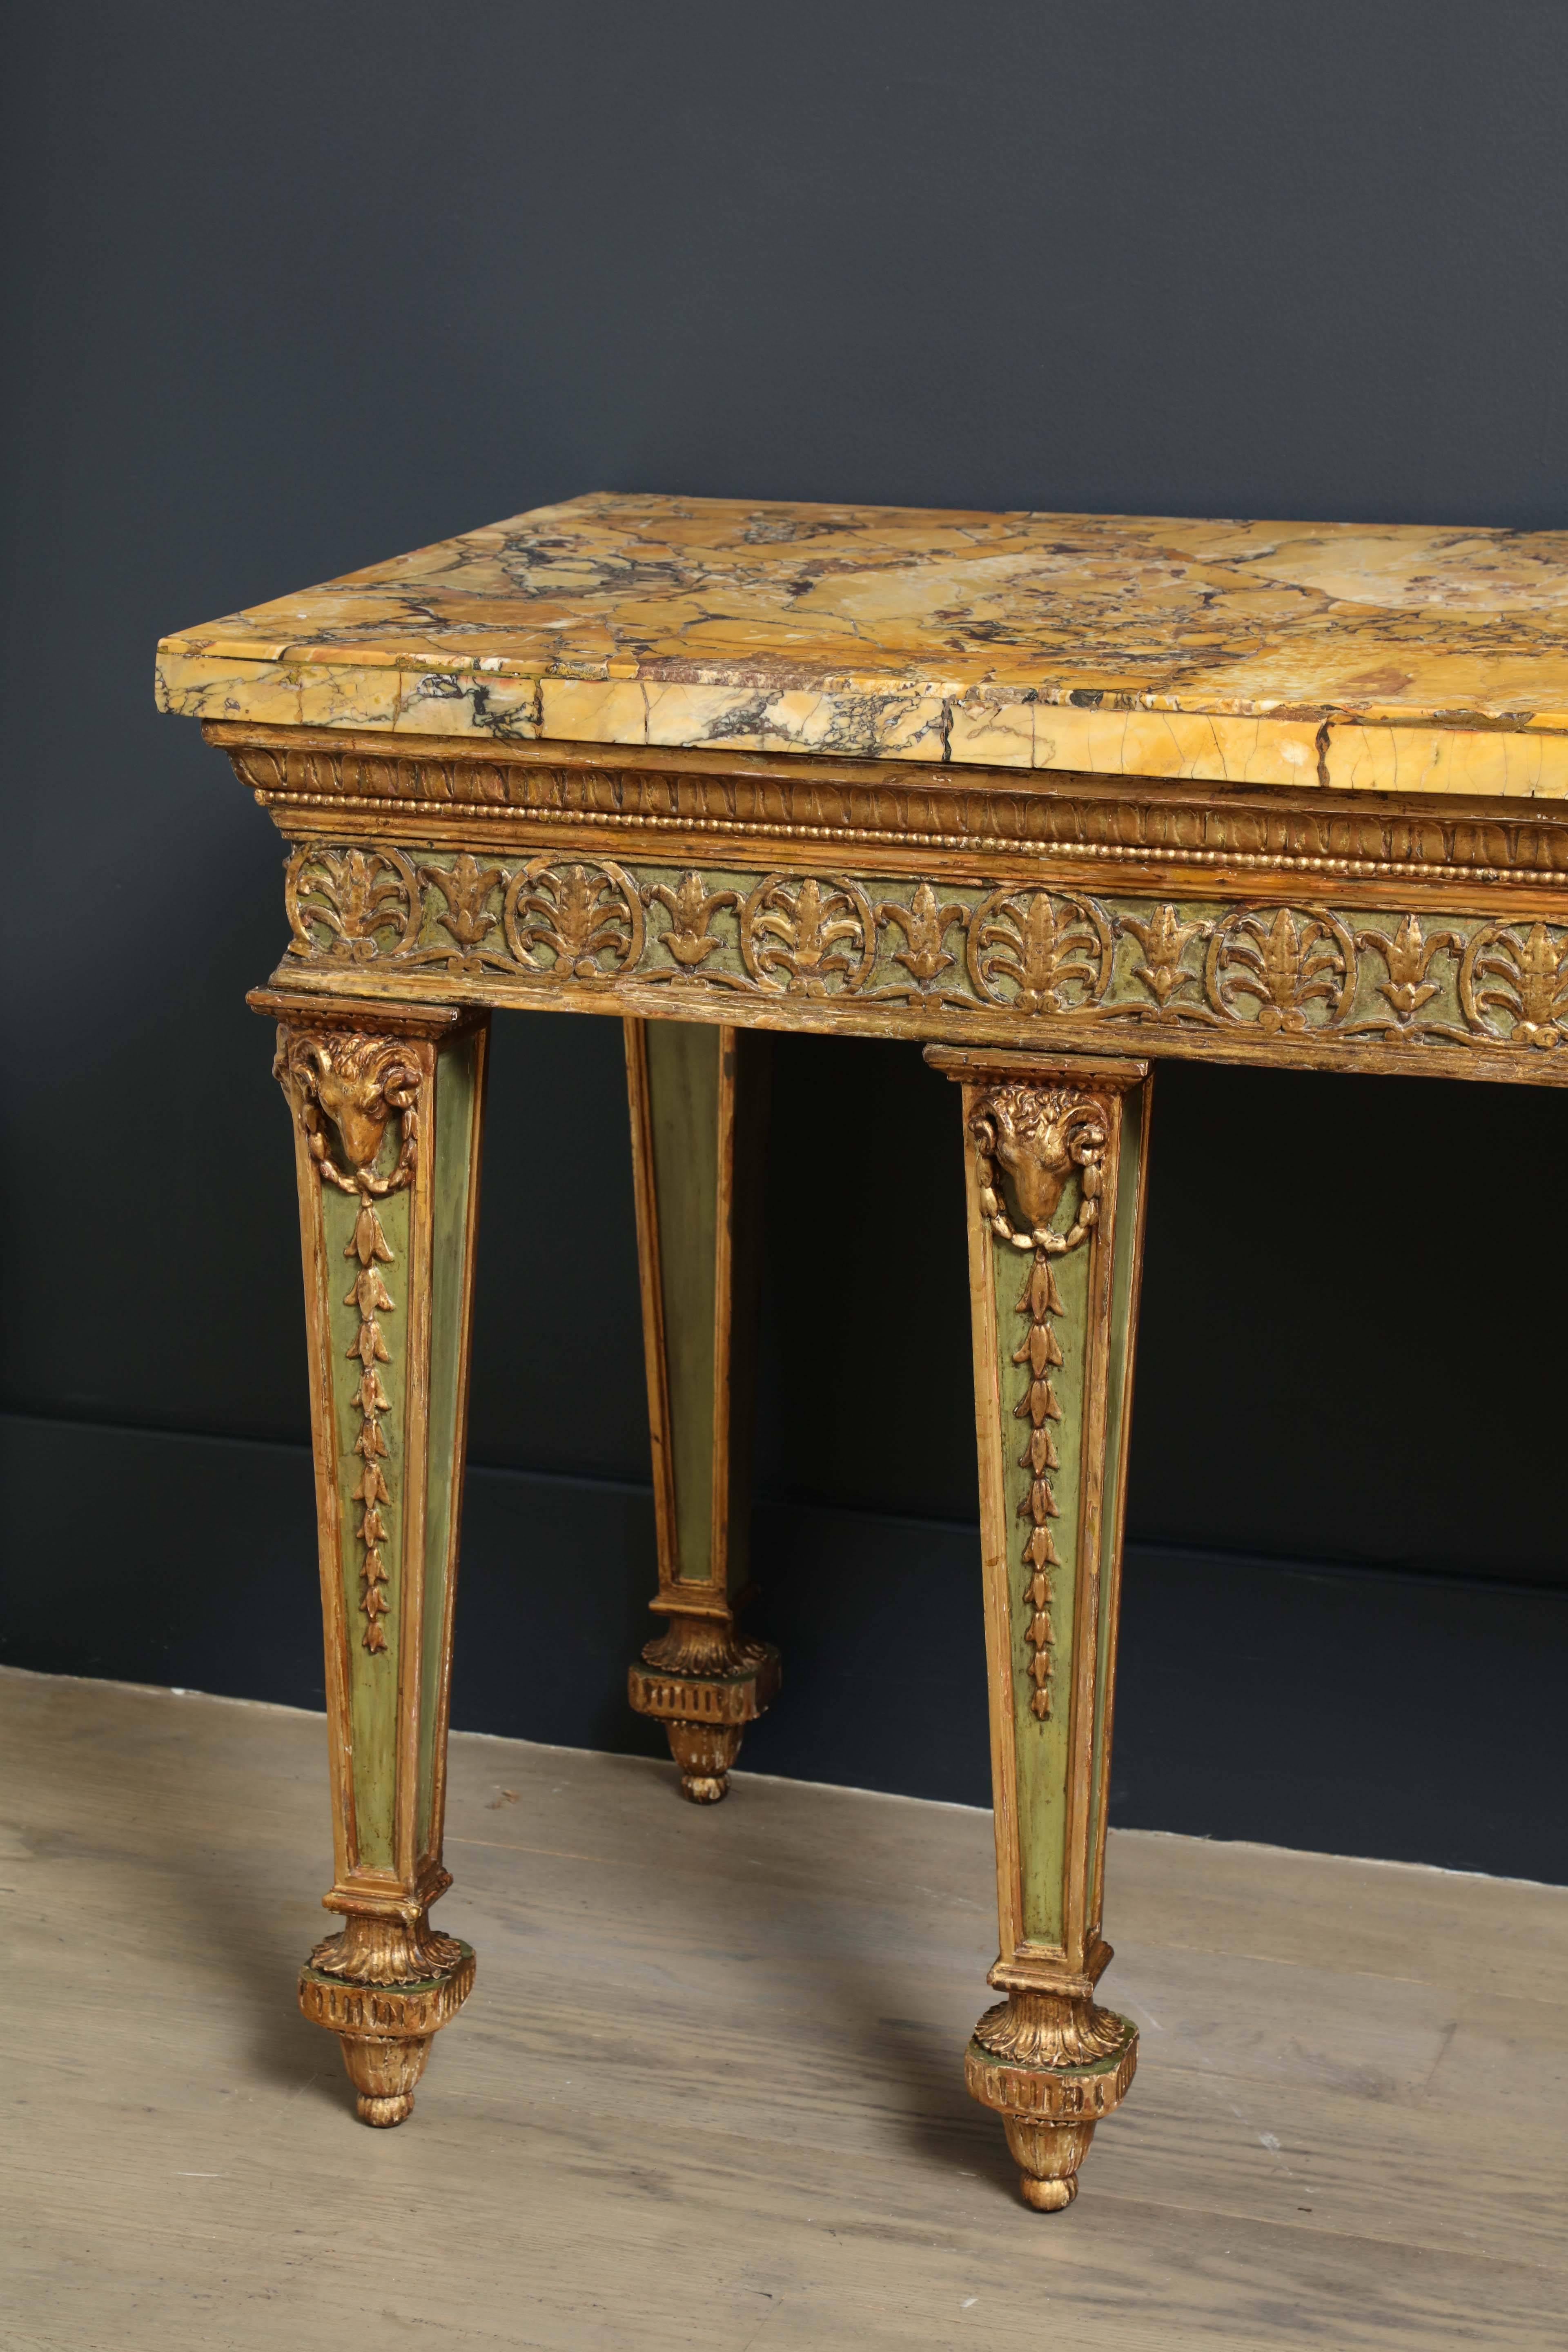 This stunning 18th century Sienna marble top, likely acquired on a Grand Tour trip, is supported on a well proportioned nineteenth century Stand with anthemion and lotus carved frieze raised on tapering legs with rams heads and pendant husks ending